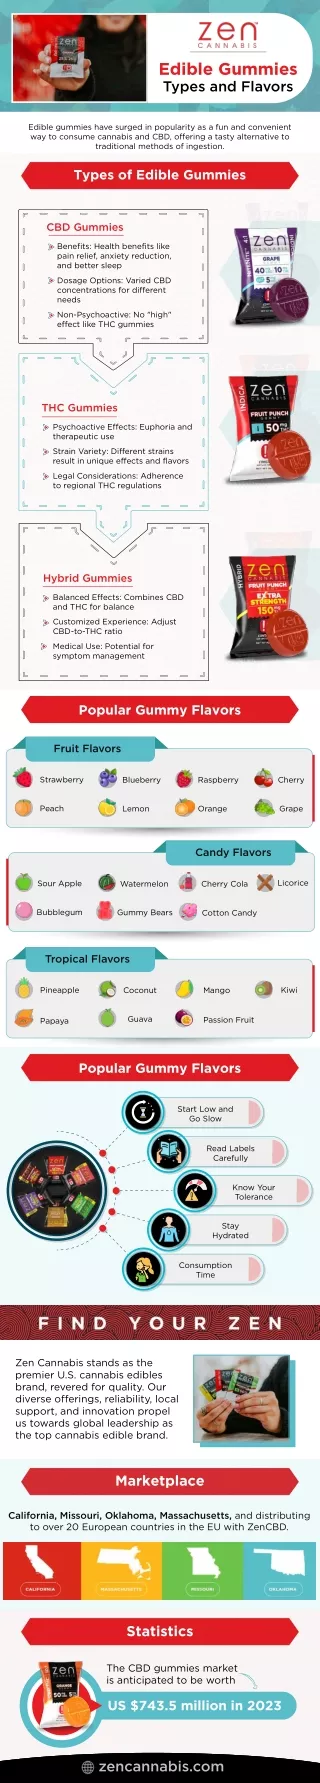 Edible Gummies Types and Flavors